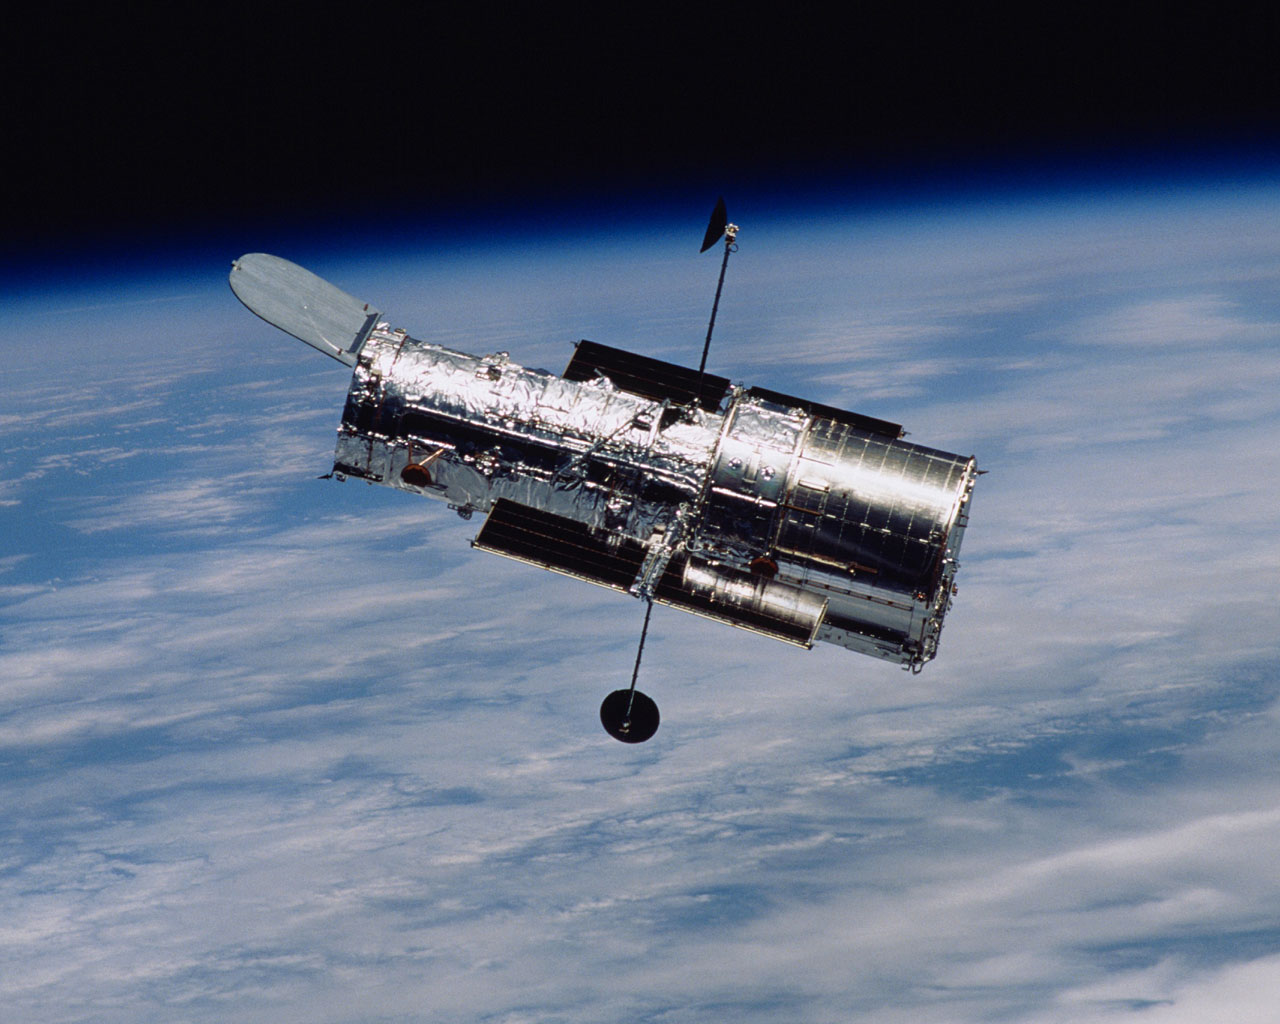 A photograph of the Hubble Space Telescope. taken by the crew of the STS-109 mission, following the successful completion of the fourth Hubble servicing mission in 2002. The iconic orbiting observatory, which celebrates 25 years of successful operation this month, has completely revolutionised our view of the Cosmos. Image Credit: NASA/STScI